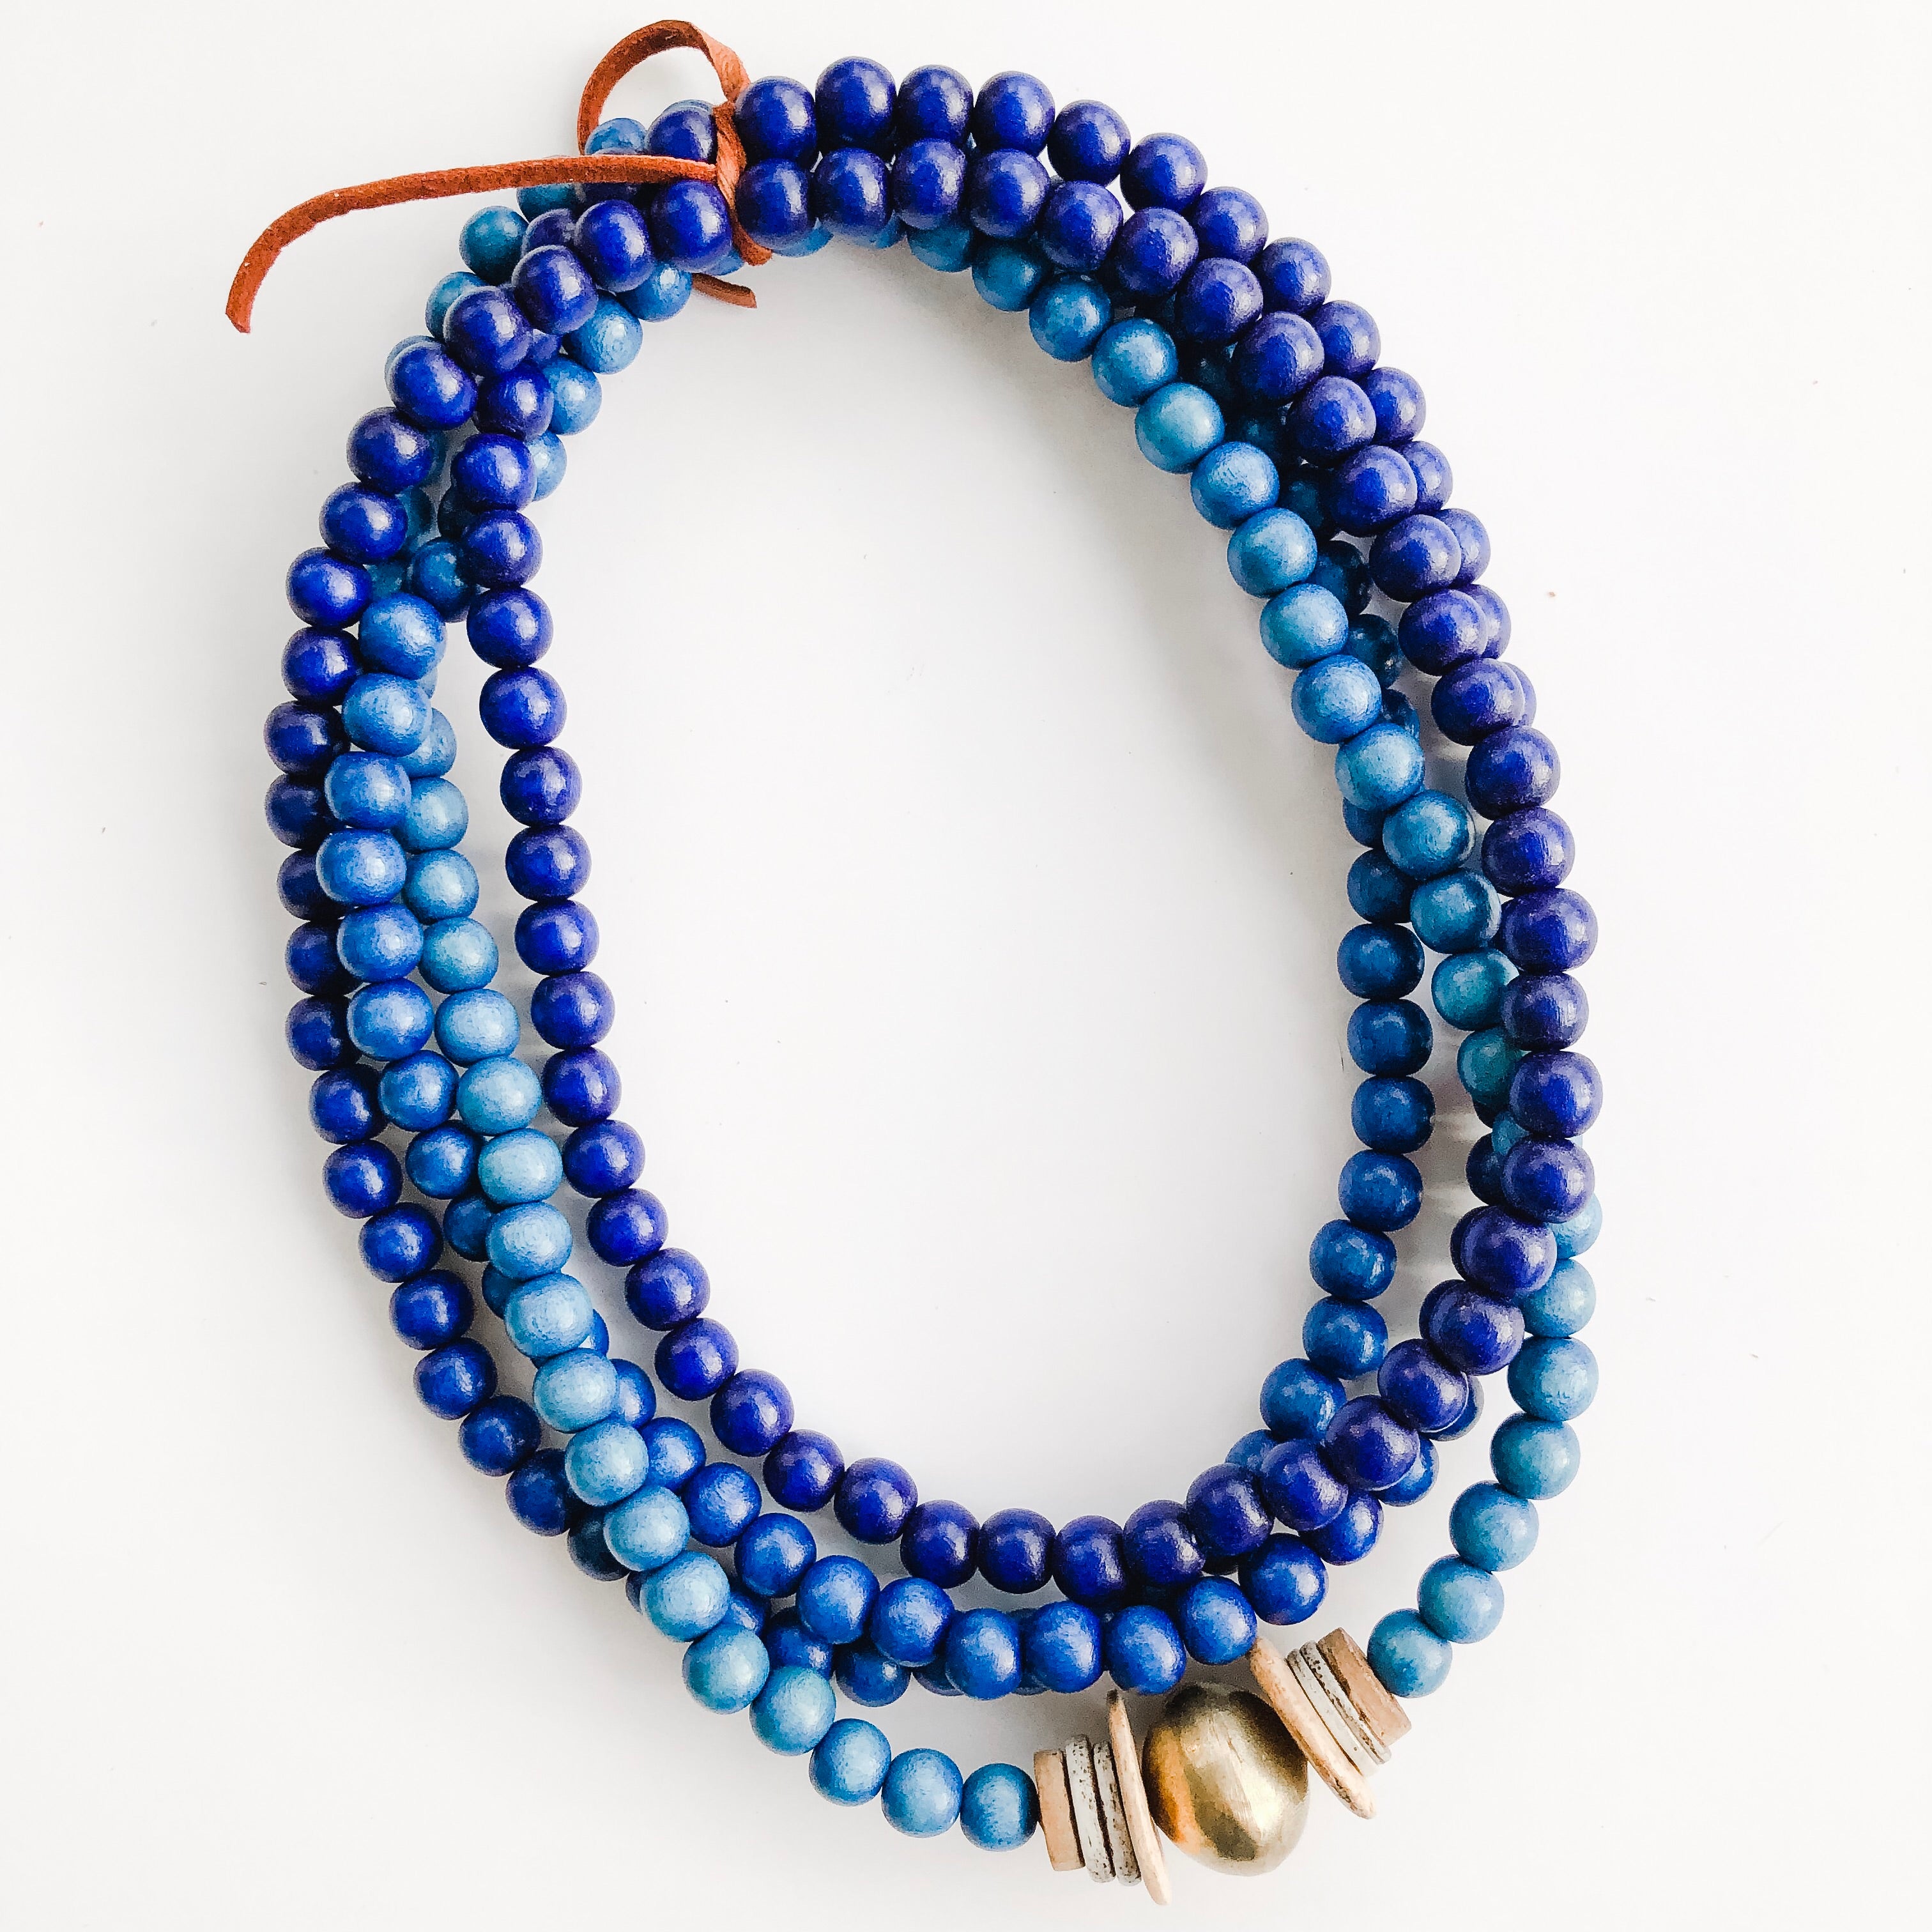 Color Me Simply Stated Ombré Wrap Necklace in Shades of Blue